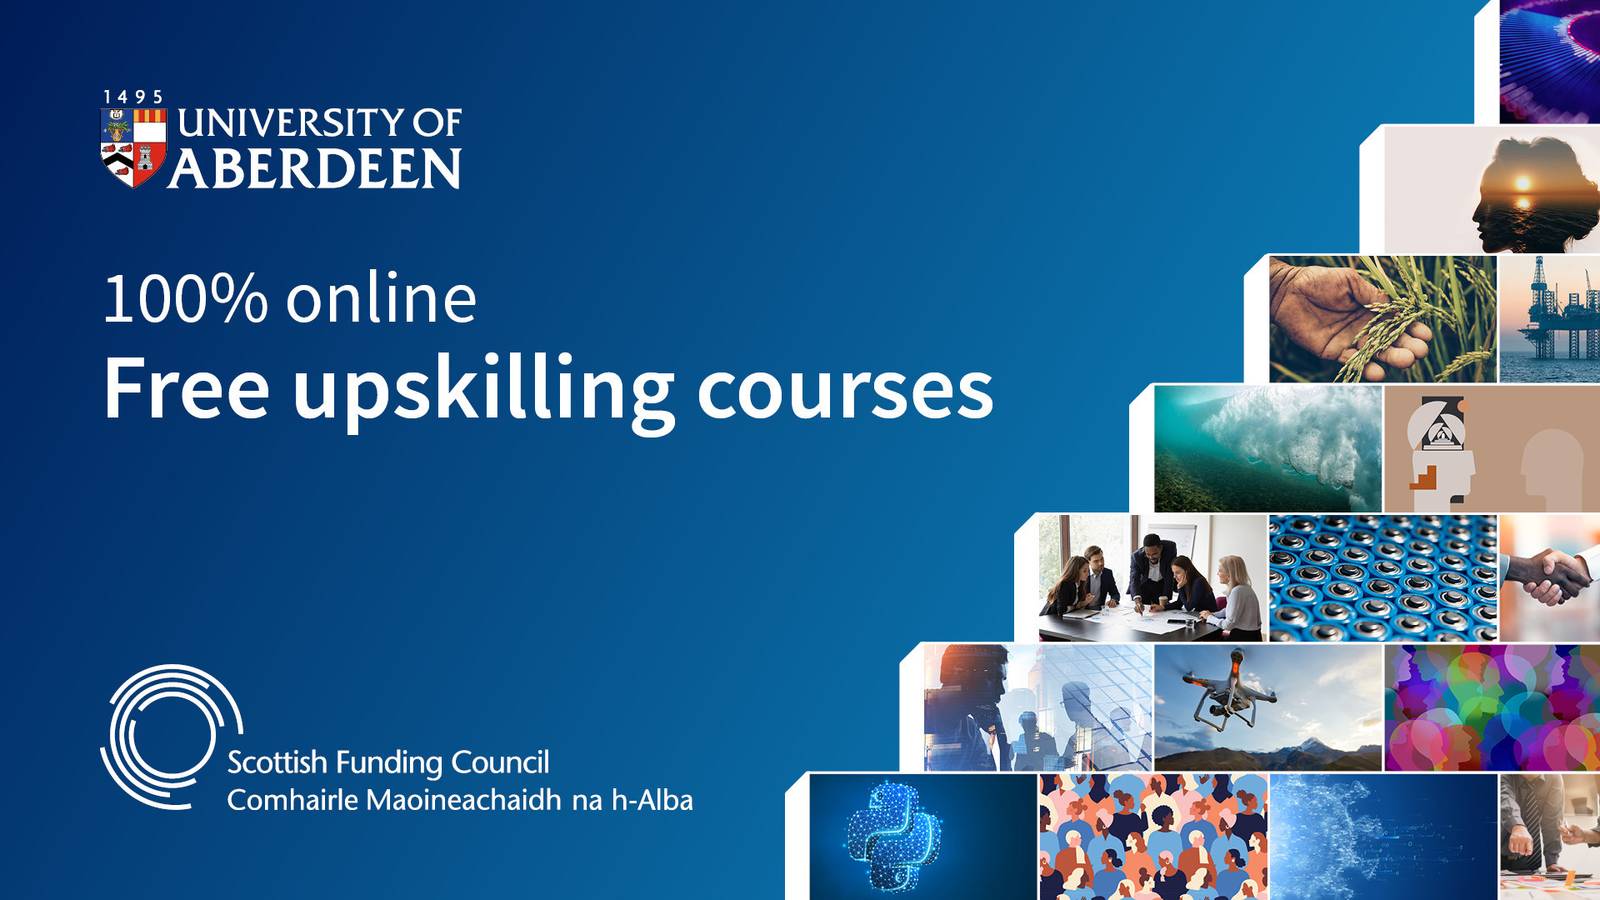 100% online free upskilling courses